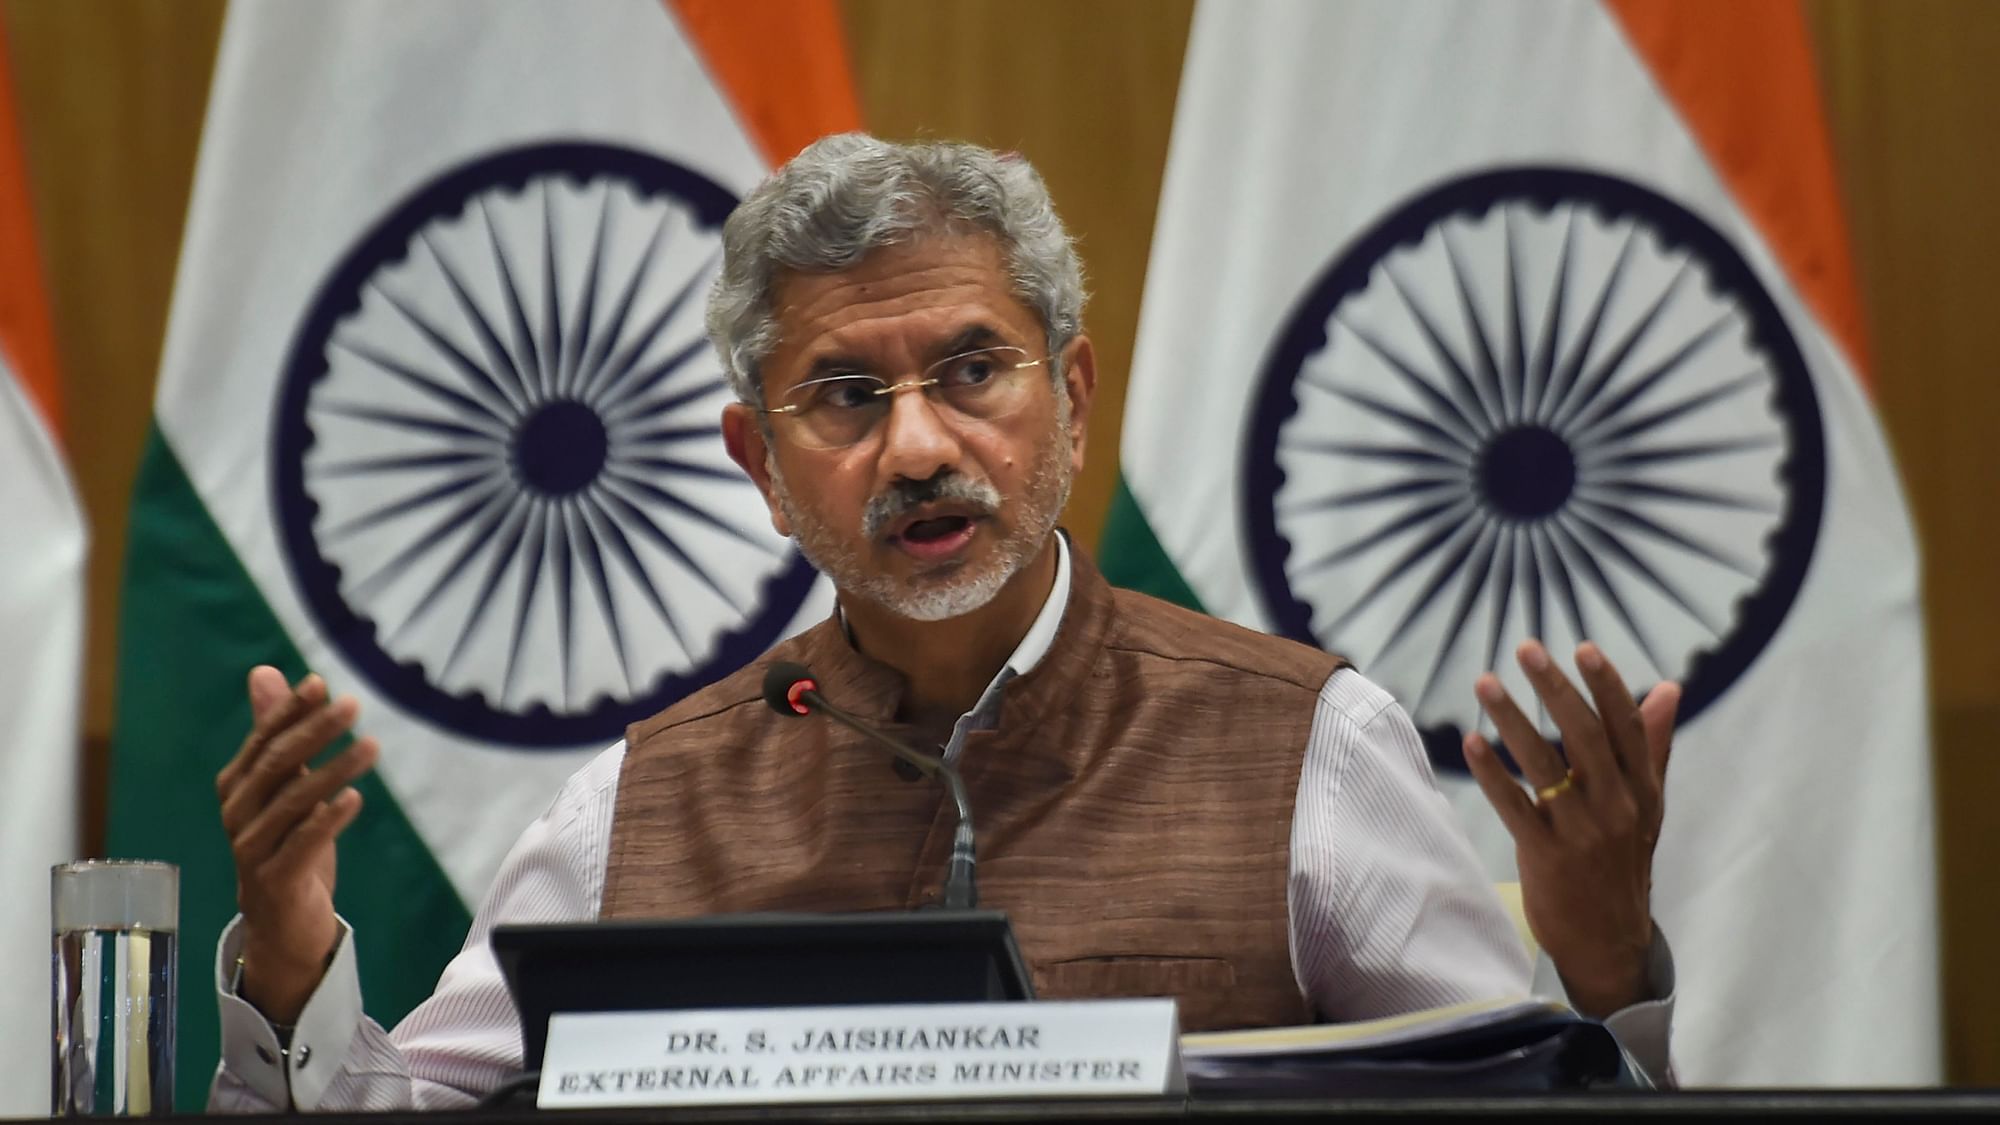 External Affairs Minister S Jaishankar during press conference on completion of first 100 days of MEA.